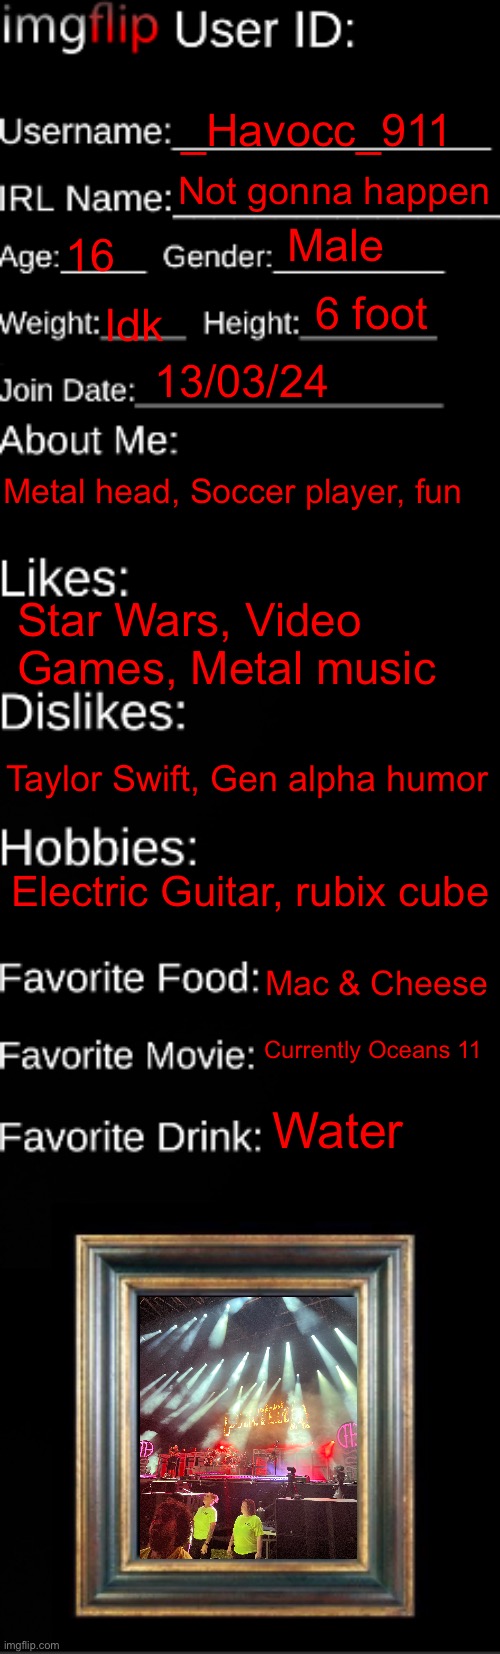 imgflip ID Card | _Havocc_911; Not gonna happen; Male; 16; 6 foot; Idk; 13/03/24; Metal head, Soccer player, fun; Star Wars, Video Games, Metal music; Taylor Swift, Gen alpha humor; Electric Guitar, rubix cube; Mac & Cheese; Currently Oceans 11; Water | image tagged in imgflip id card | made w/ Imgflip meme maker